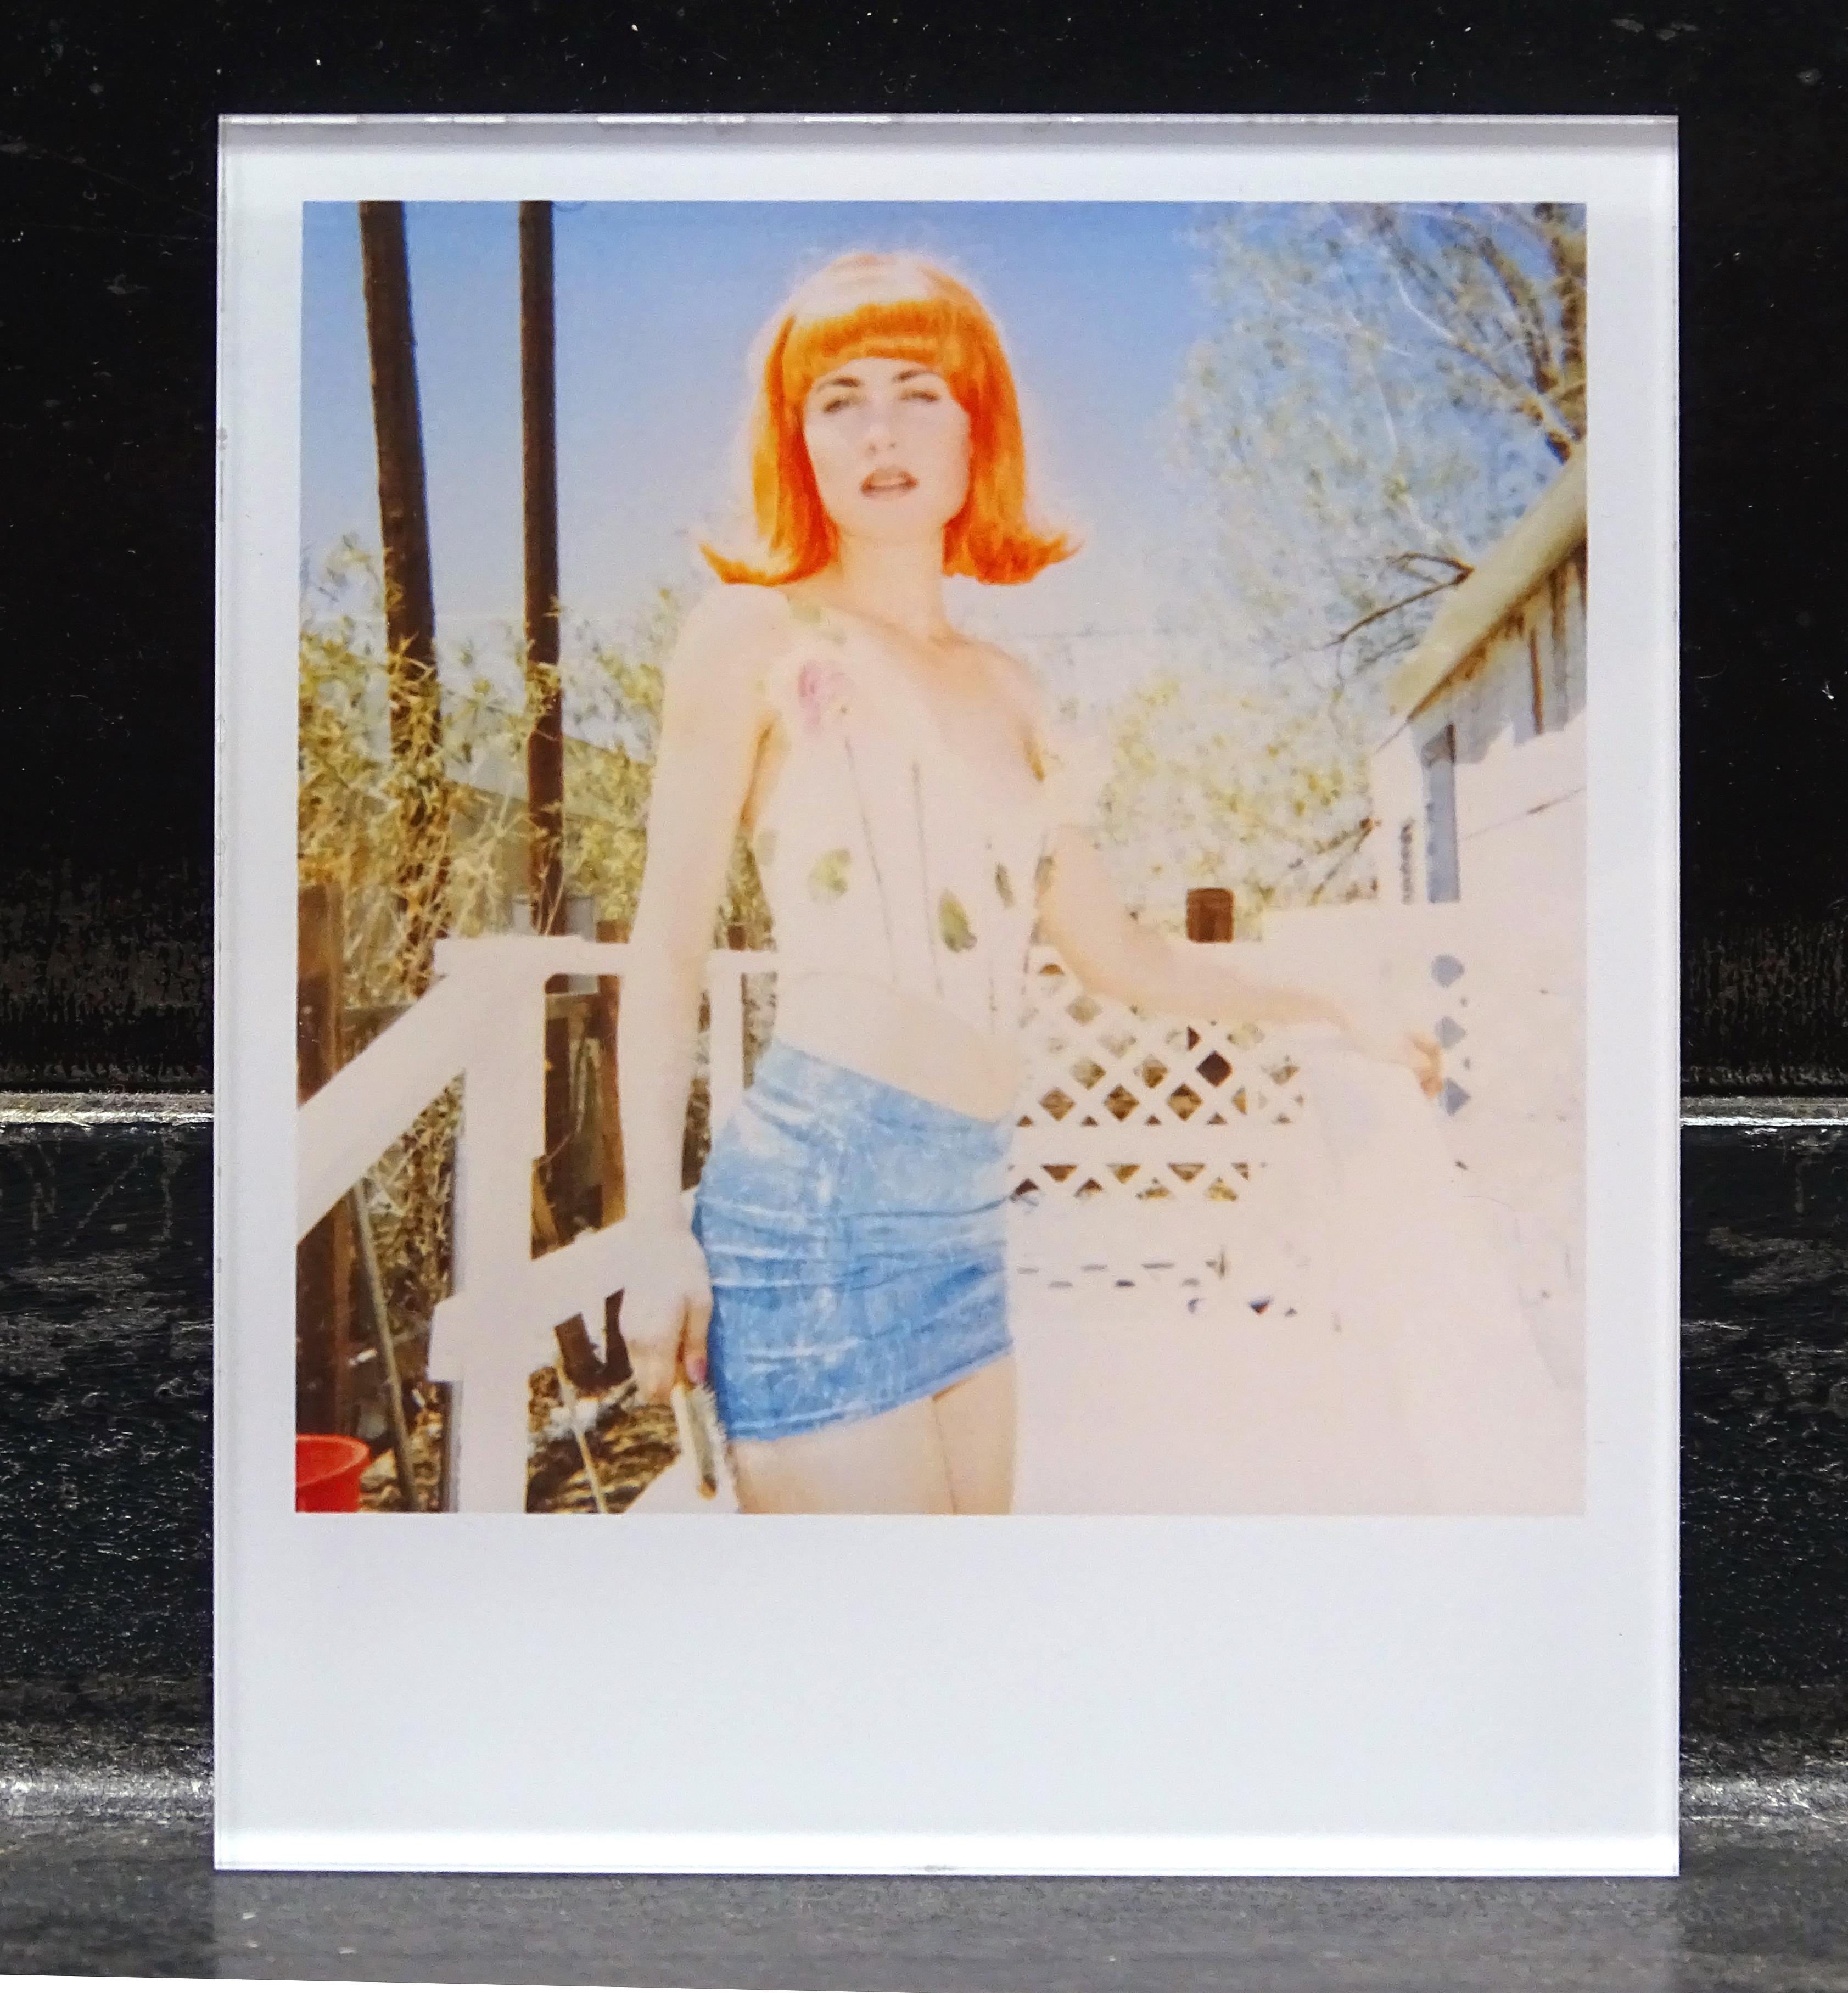 Stefanie Schneider's Minis
'White Trash Beautiful (29 Palms, CA), 1999
signed and signature brand on verso
Lambda digital Color Photographs based on a Polaroid

Polaroid sized open Editions 1999-2013
10.7 x 8.8cm (Image 7.9x7.7cm)
mounted: